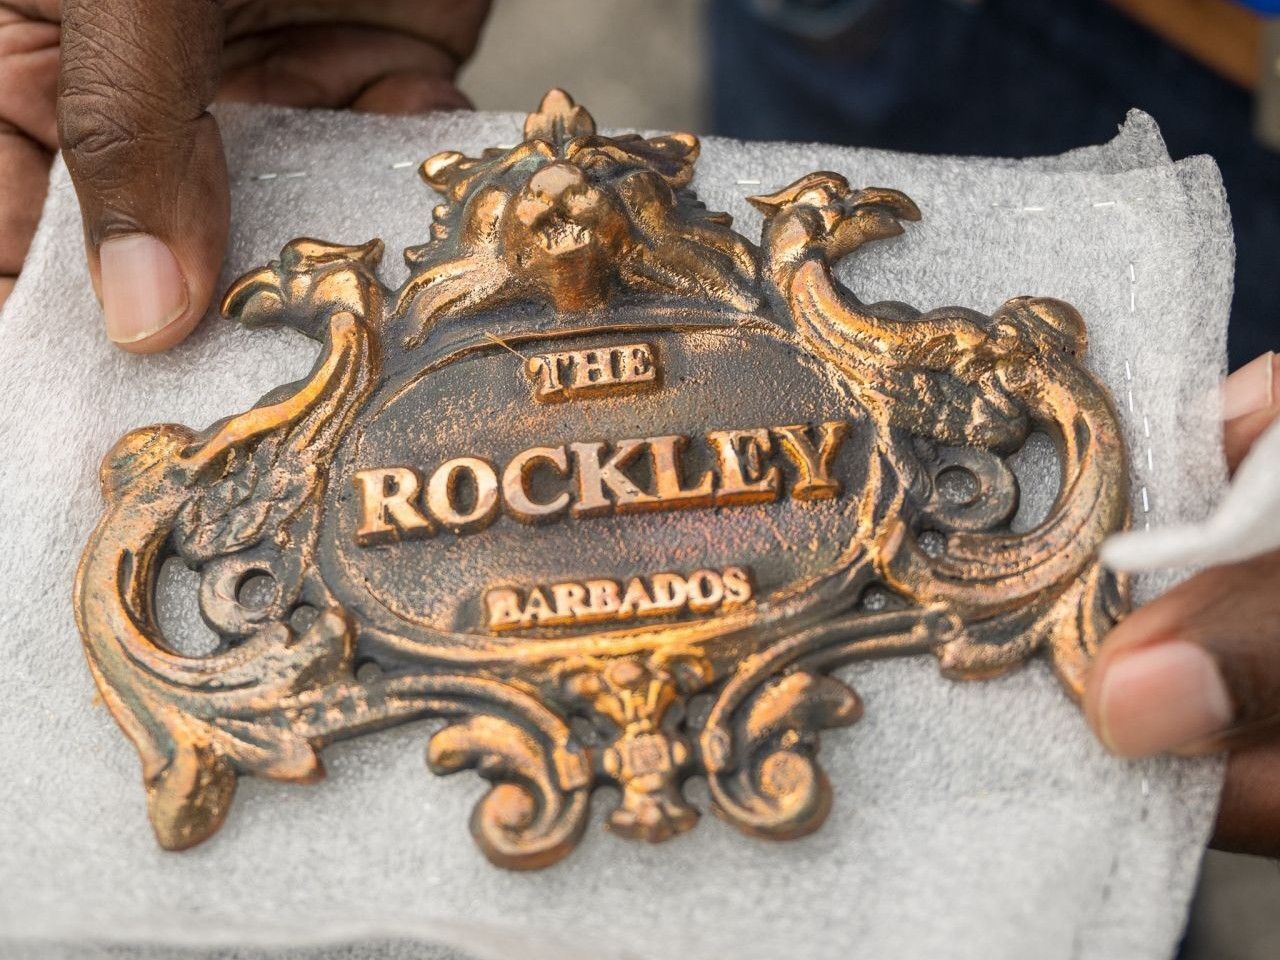 The historic Rockley, the world’s oldest rum pot still, has returned to Barbados!